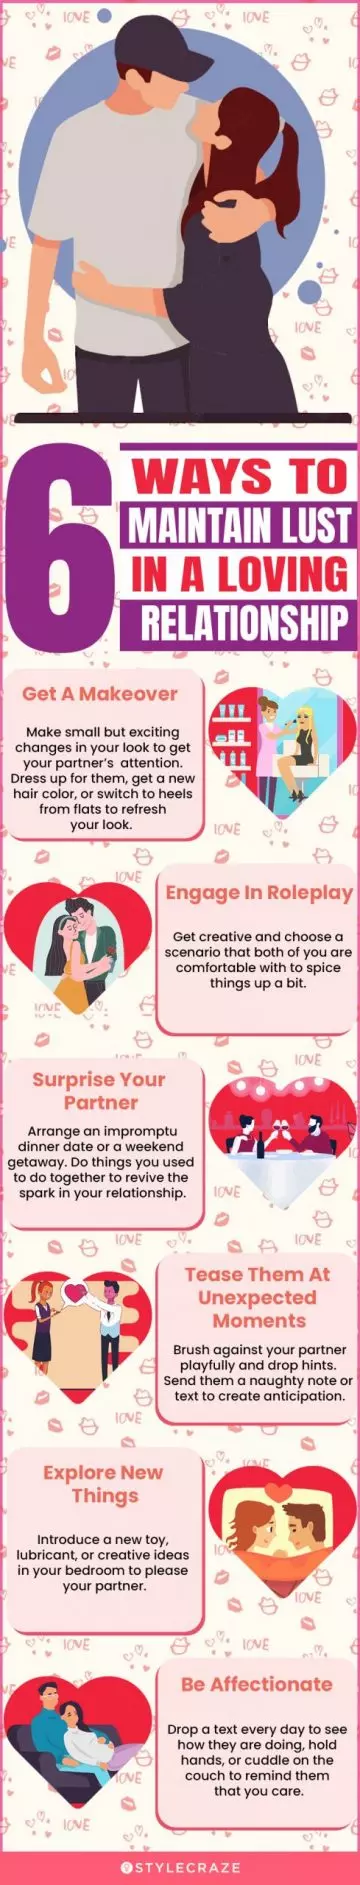 6 ways to maintain lust in a loving relationship (infographic)